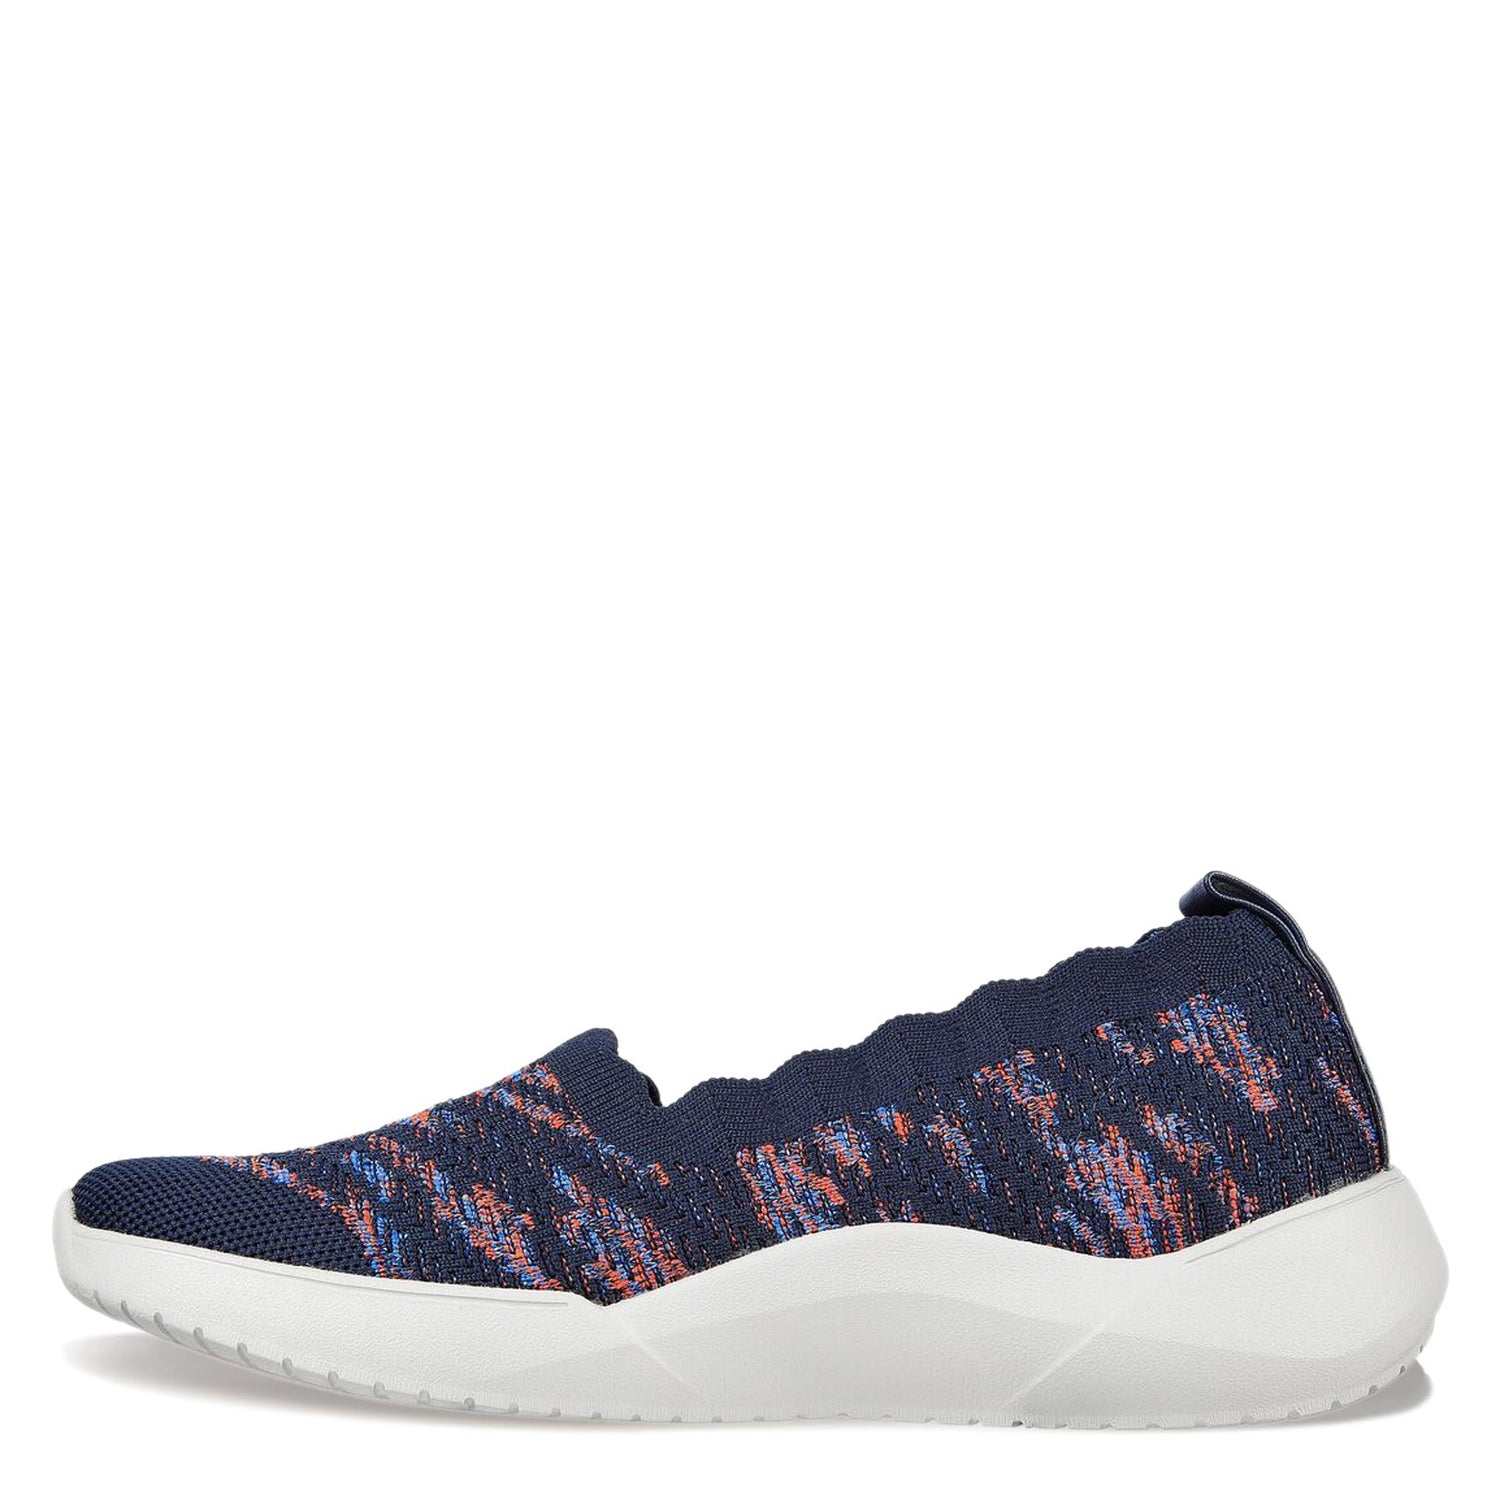 Peltz Shoes  Women's Skechers Relaxed Fit: Seager Cup - My Impression Slip-On NAVY MULTI 158472-NVMT